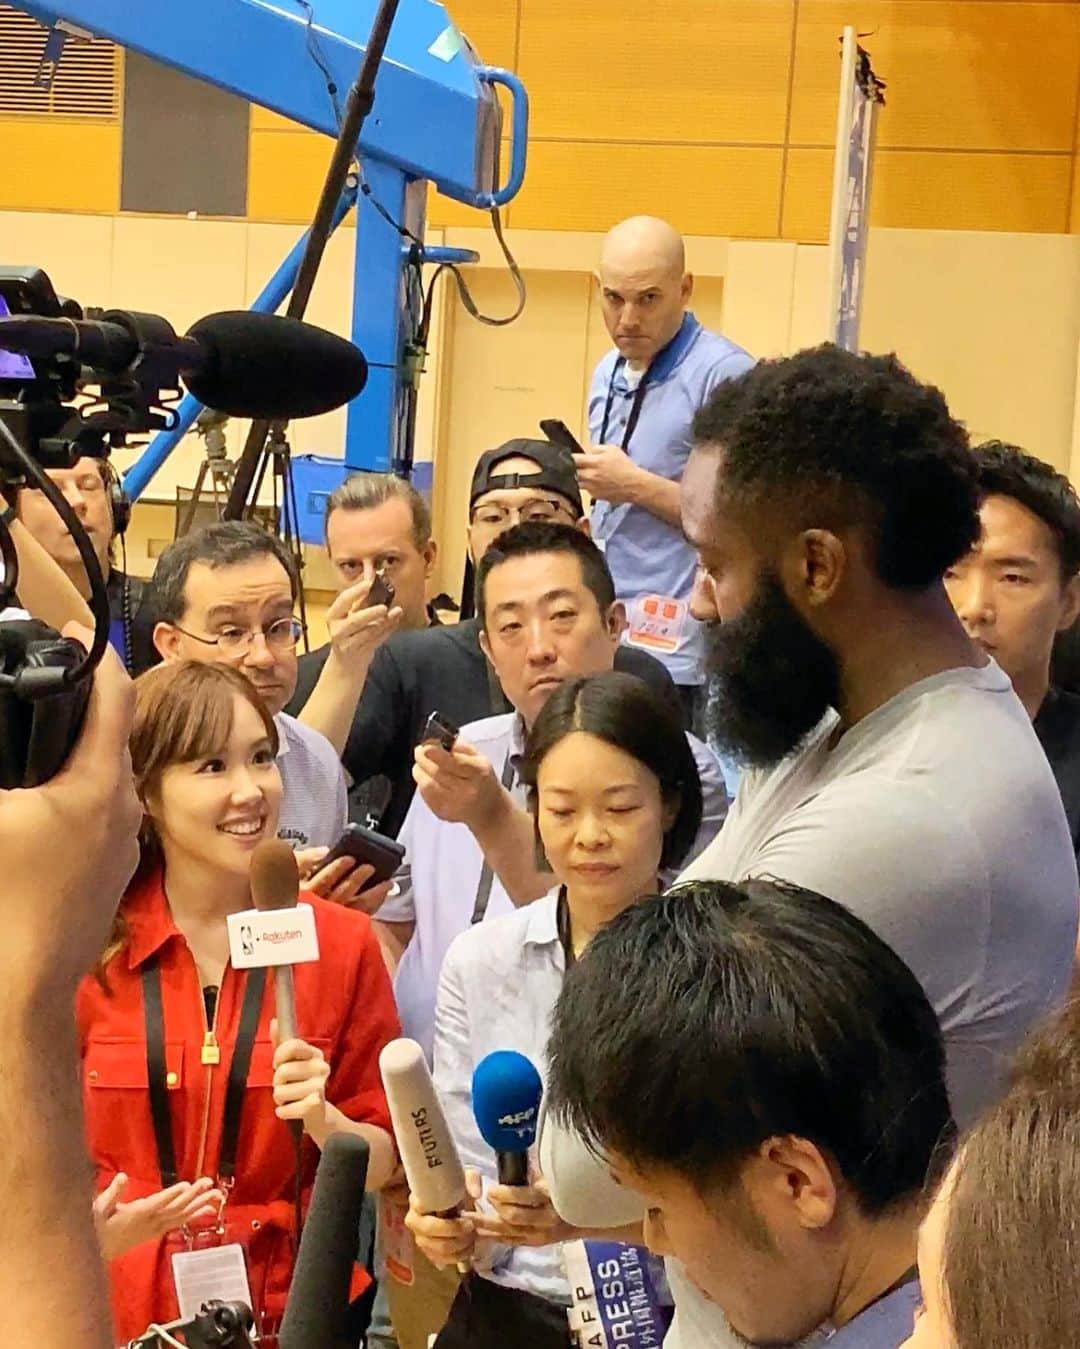 メロディー・モリタさんのインスタグラム写真 - (メロディー・モリタInstagram)「The NBA 2019-2020 season is tentatively set to resume on July 30th at Walt Disney World (ESPN Wide World Of Sports complex) in Florida! The 22 teams eligible to play include both the Washington Wizards and Memphis Grizzlies, so this is exciting news for the Japanese fans as well. * Due to the pandemic, the season was suspended back in March, and countless discussions took place to carefully plan if/when it would be possible to start the season back up again. Since I've been unable to report and cover the playoffs onwards that I was scheduled to, I've been watching a lot of basketball films lately waiting for the official announcement. The remainder of the season will be drastically different in many ways (such as without fans, strict precautions, etc.), but moving forward in a positive direction will provide us strength and hope during this time.✨ I truly wish all forms of sports, art, businesses, academics, etc. will gradually be able to resume activities and that we all continue to stay safe and connected.  NBA 2019-2020シーズンの再開日が7月30日、フロリダのウォルト・ディズニー・ワールドで開催予定と発表されました✨ まだ様々な調整が必要ですが参加可能とされた22チームには八村塁選手が所属のウィザーズと、2-wayプレイヤー渡邊雄太選手のグリズリーズも含まれていますので、日本の方々も楽しみが倍増です。  3月11日からシーズンが中断となり、プレーオフでの現地リポートの予定もキャンセルとなっていた中、過去のスーパープレー映像などを見てウズウズしていました。今までにない形となる無観客での新たなNBAとなる様ですが、私たちに再び勇気と希望を与えてくれることでしょう✊✨ これから全てのスポーツ、そして様々なジャンルの活動が日常に戻り、私たちも普通にそれを心から楽しめる日が早く来る事を願うばかりです。」6月6日 2時08分 - melodeemorita